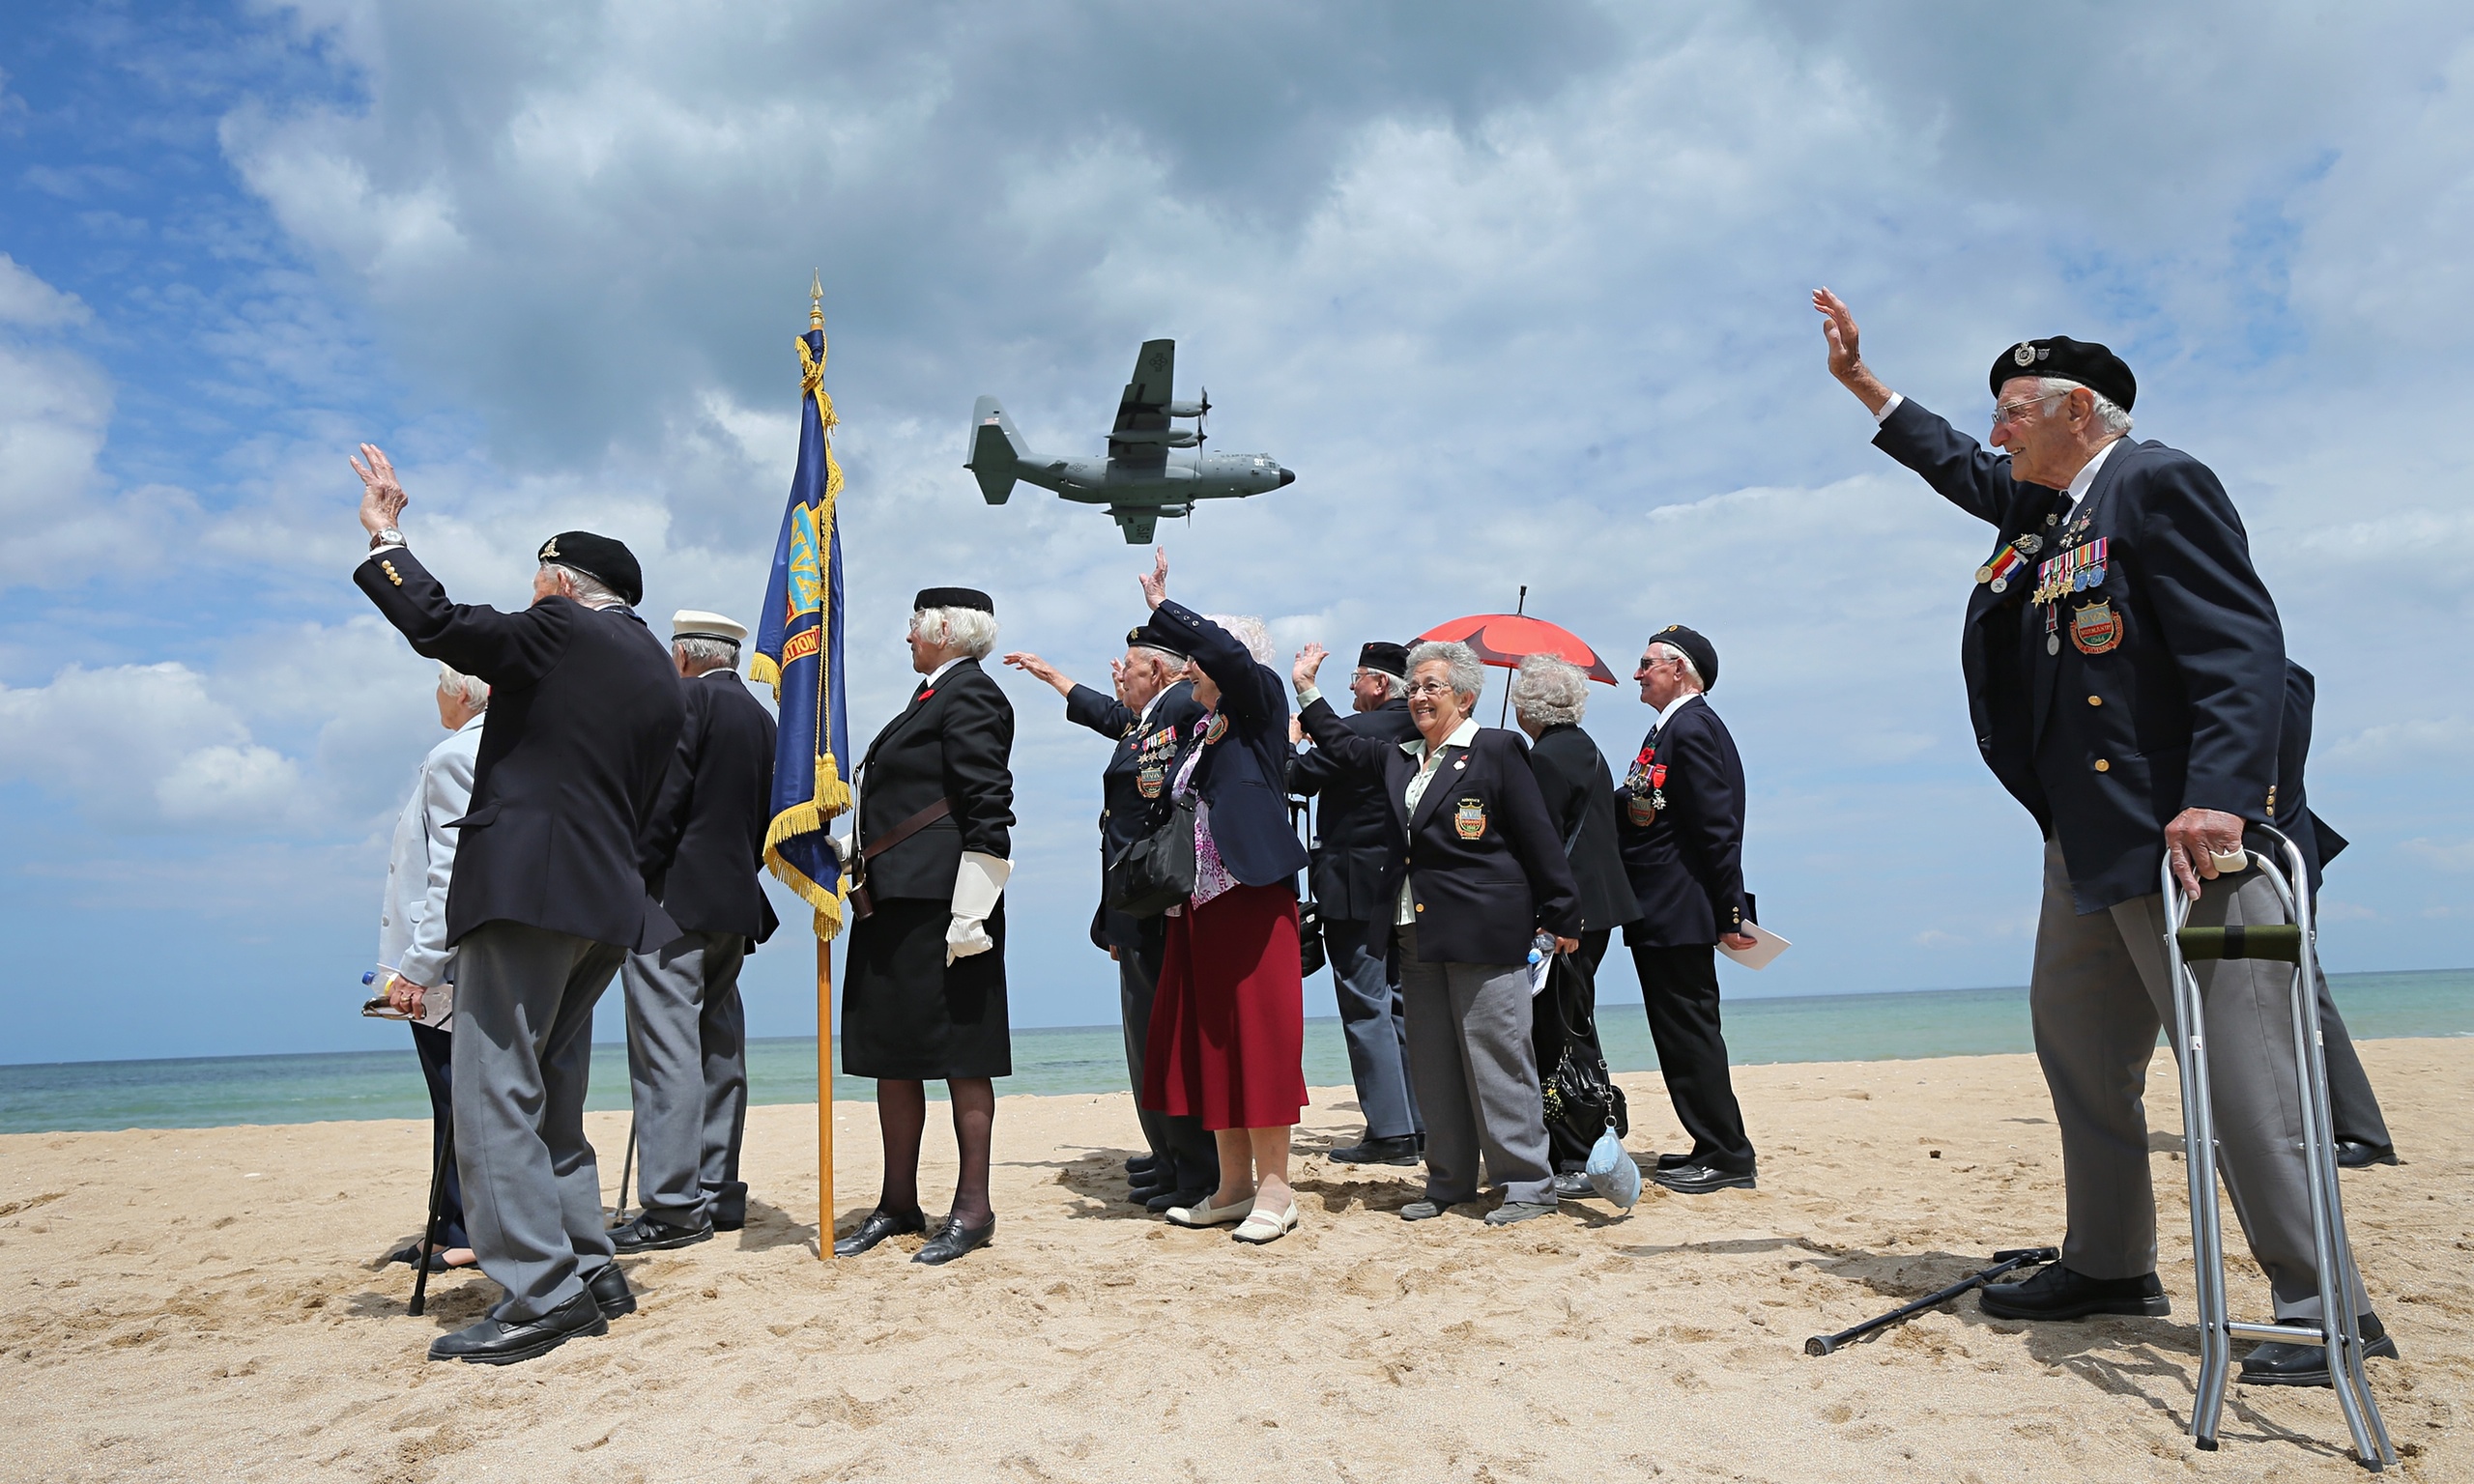 Dday veterans make emotional return to Normandy beaches 70 years on